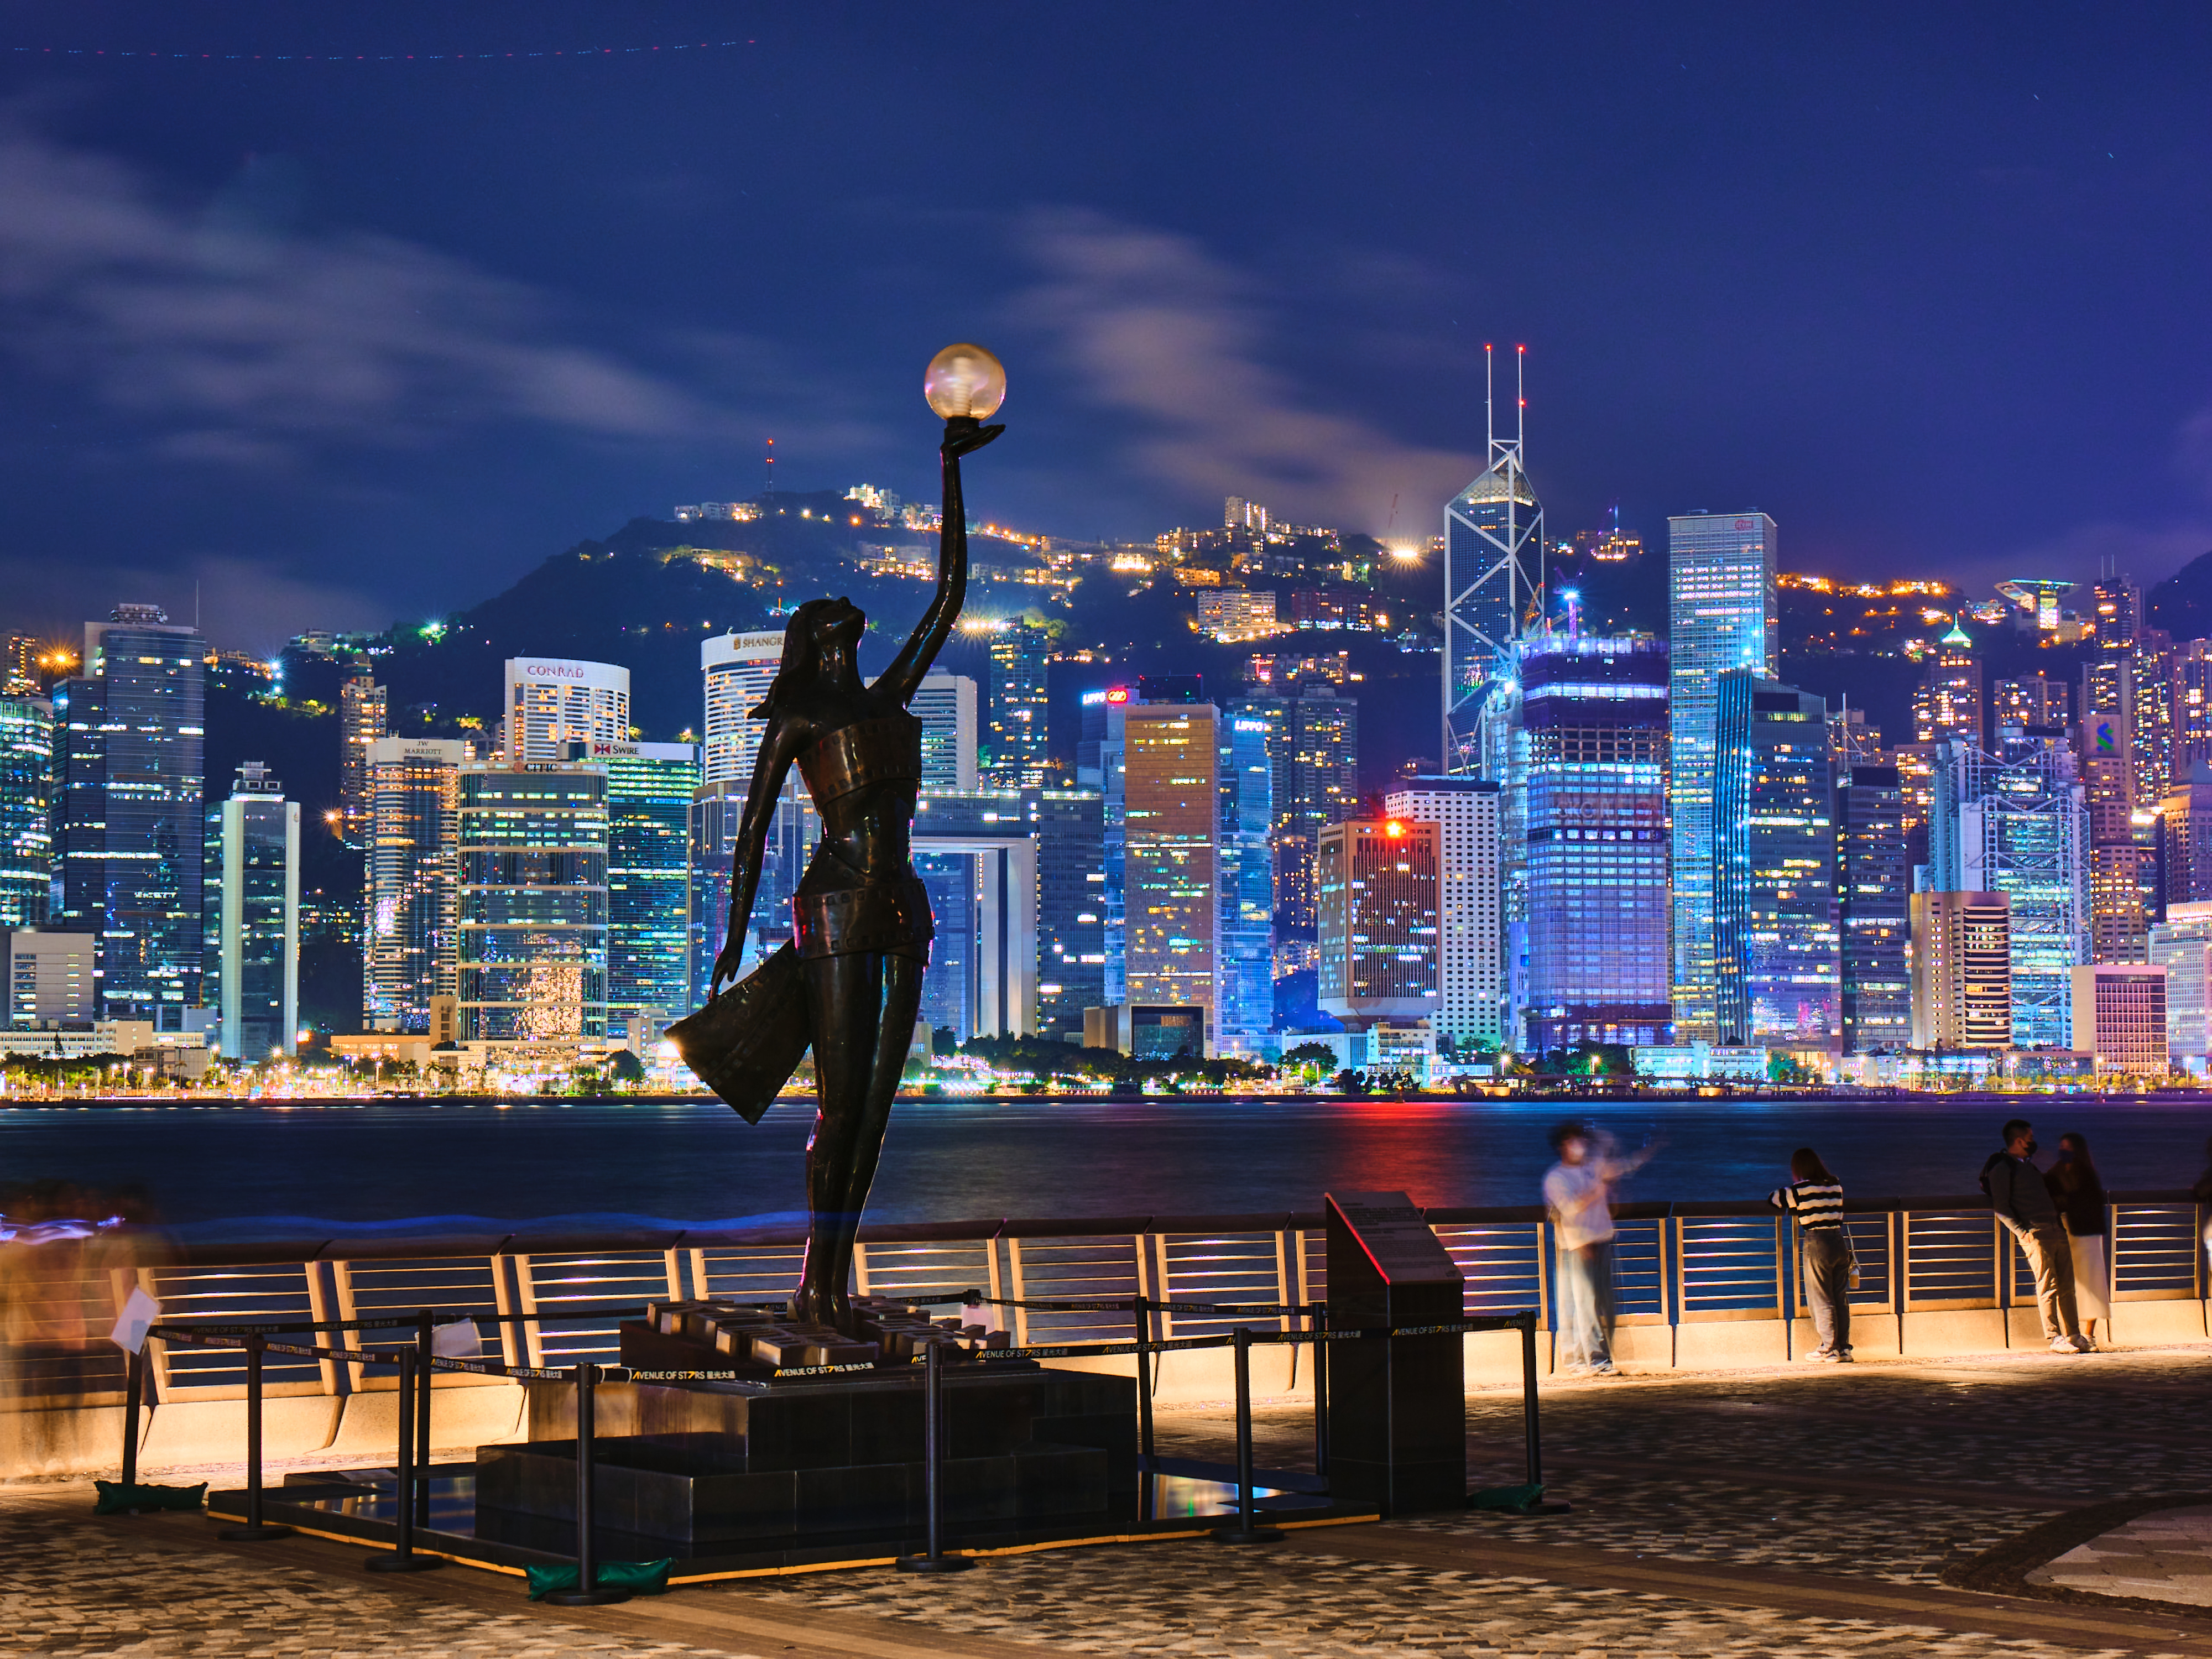 Sculpture of a figure holding aloft a glowing orb by a waterfront with city skyline backdrop at night